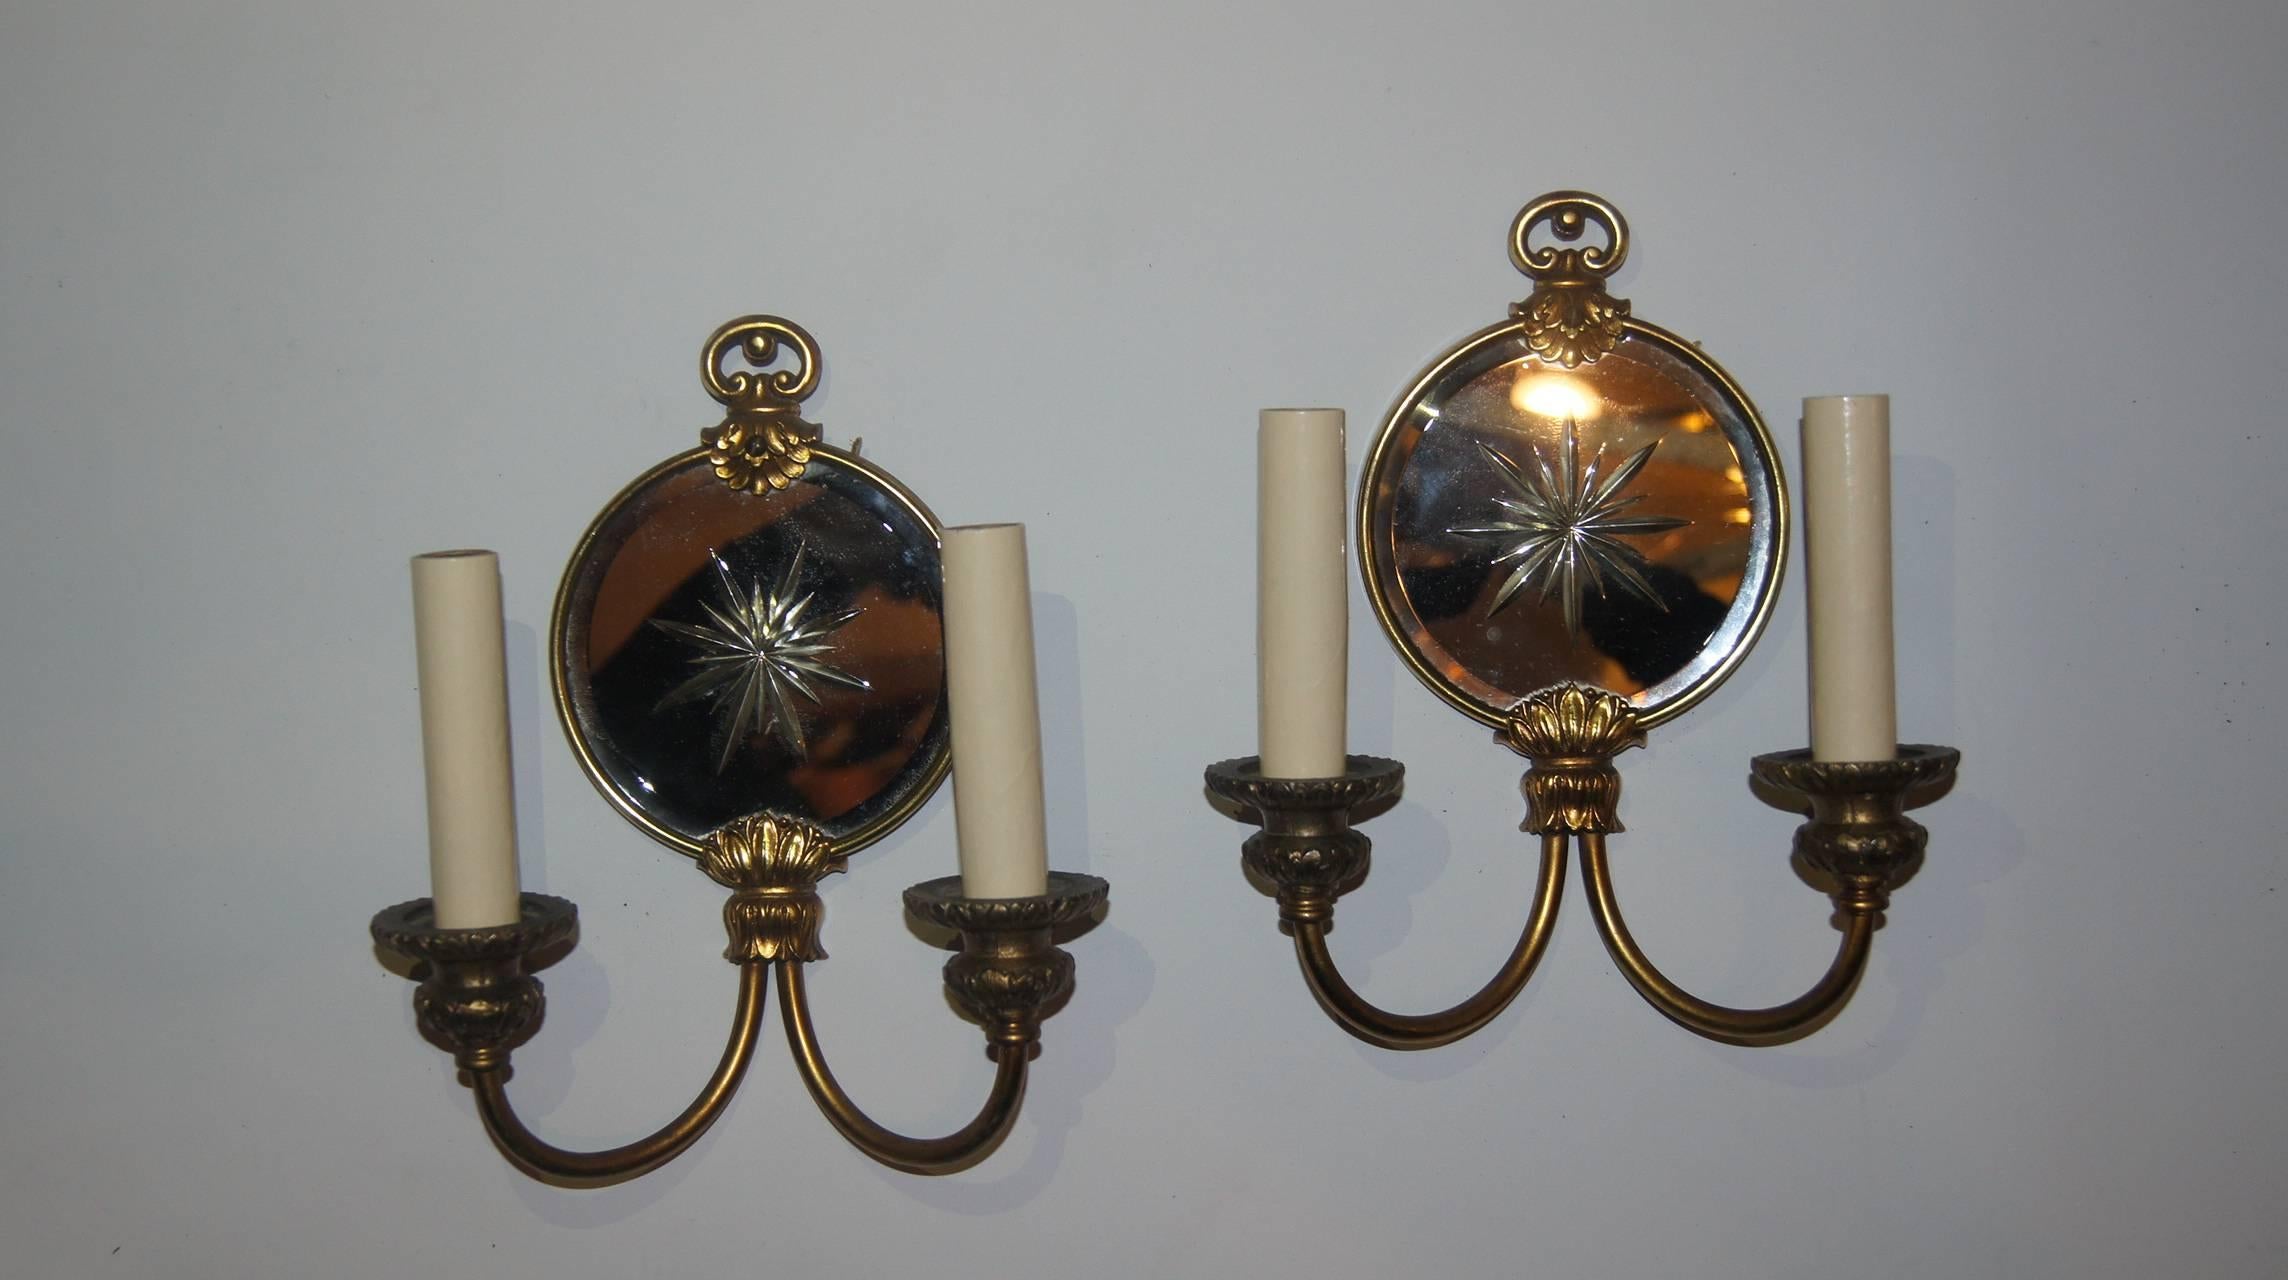 Pair of French 1930s neoclassic style two-light sconces with etched mirrored back.

Measurements:
Height 10